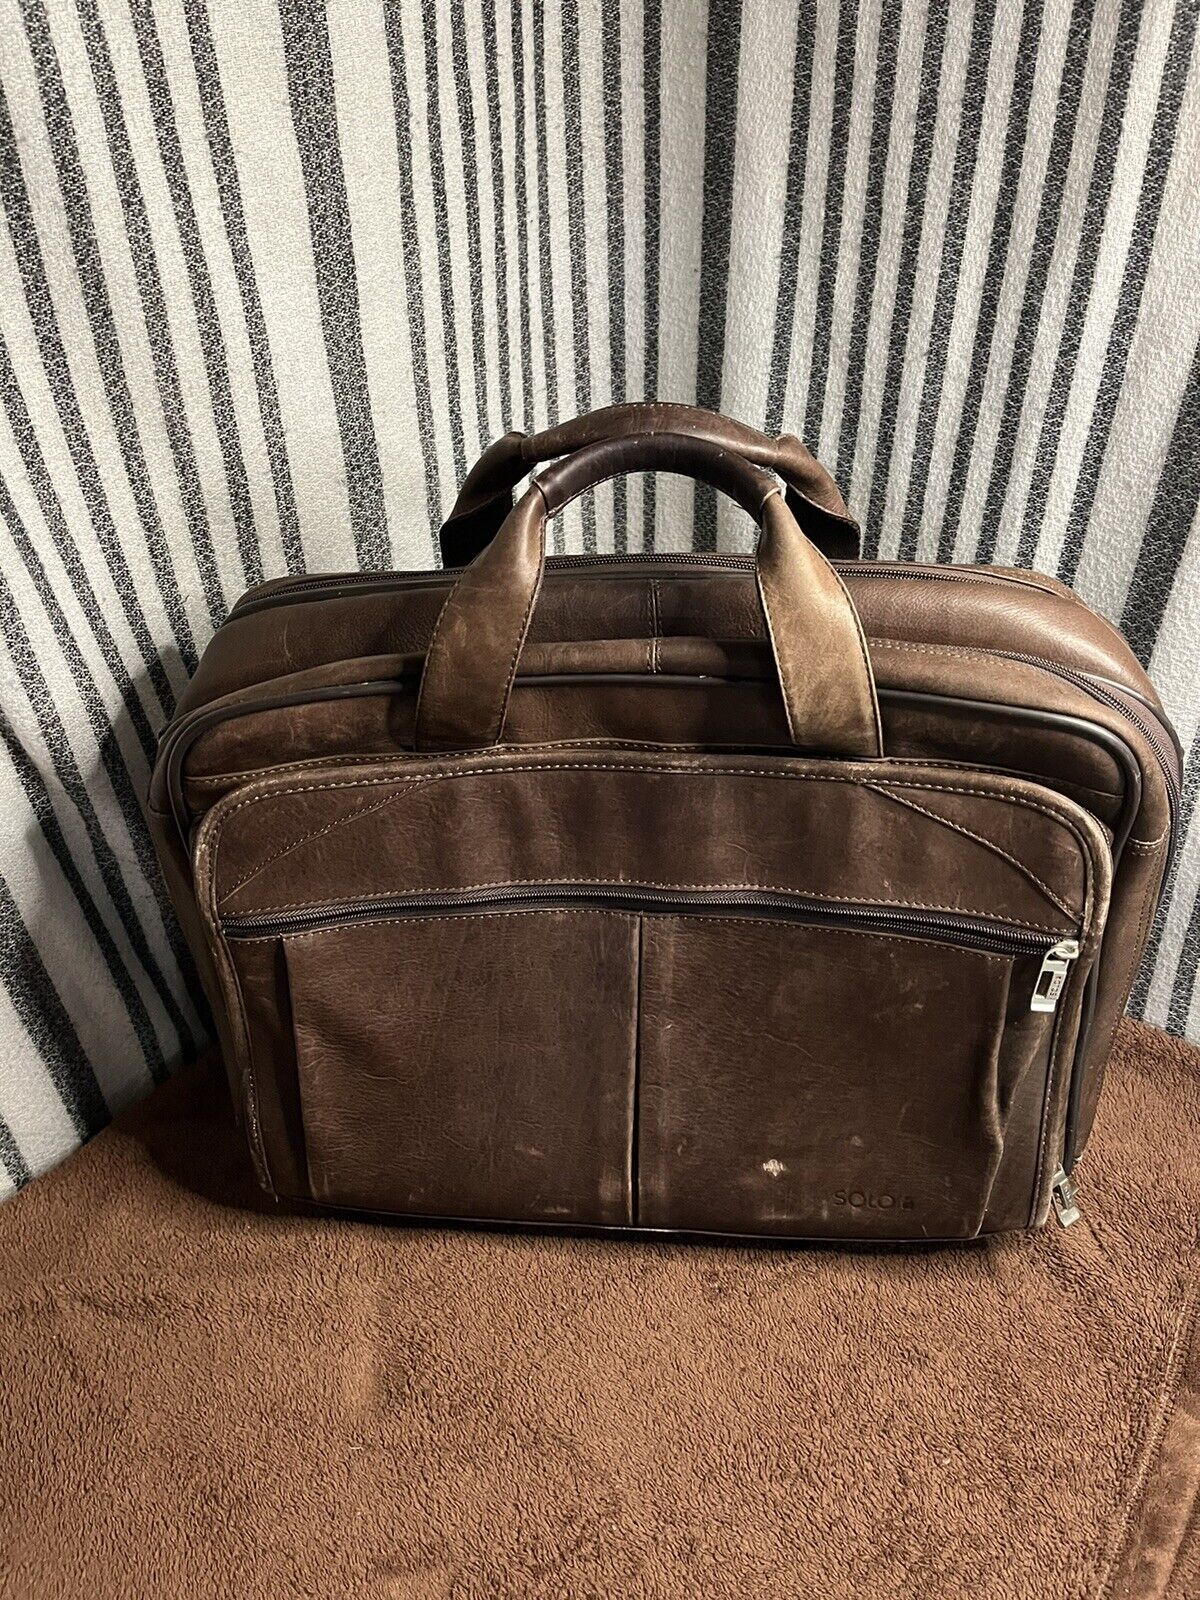 Solo Walker Leather Rolling Luggage Laptop Bag, Extending Handle Carry On.